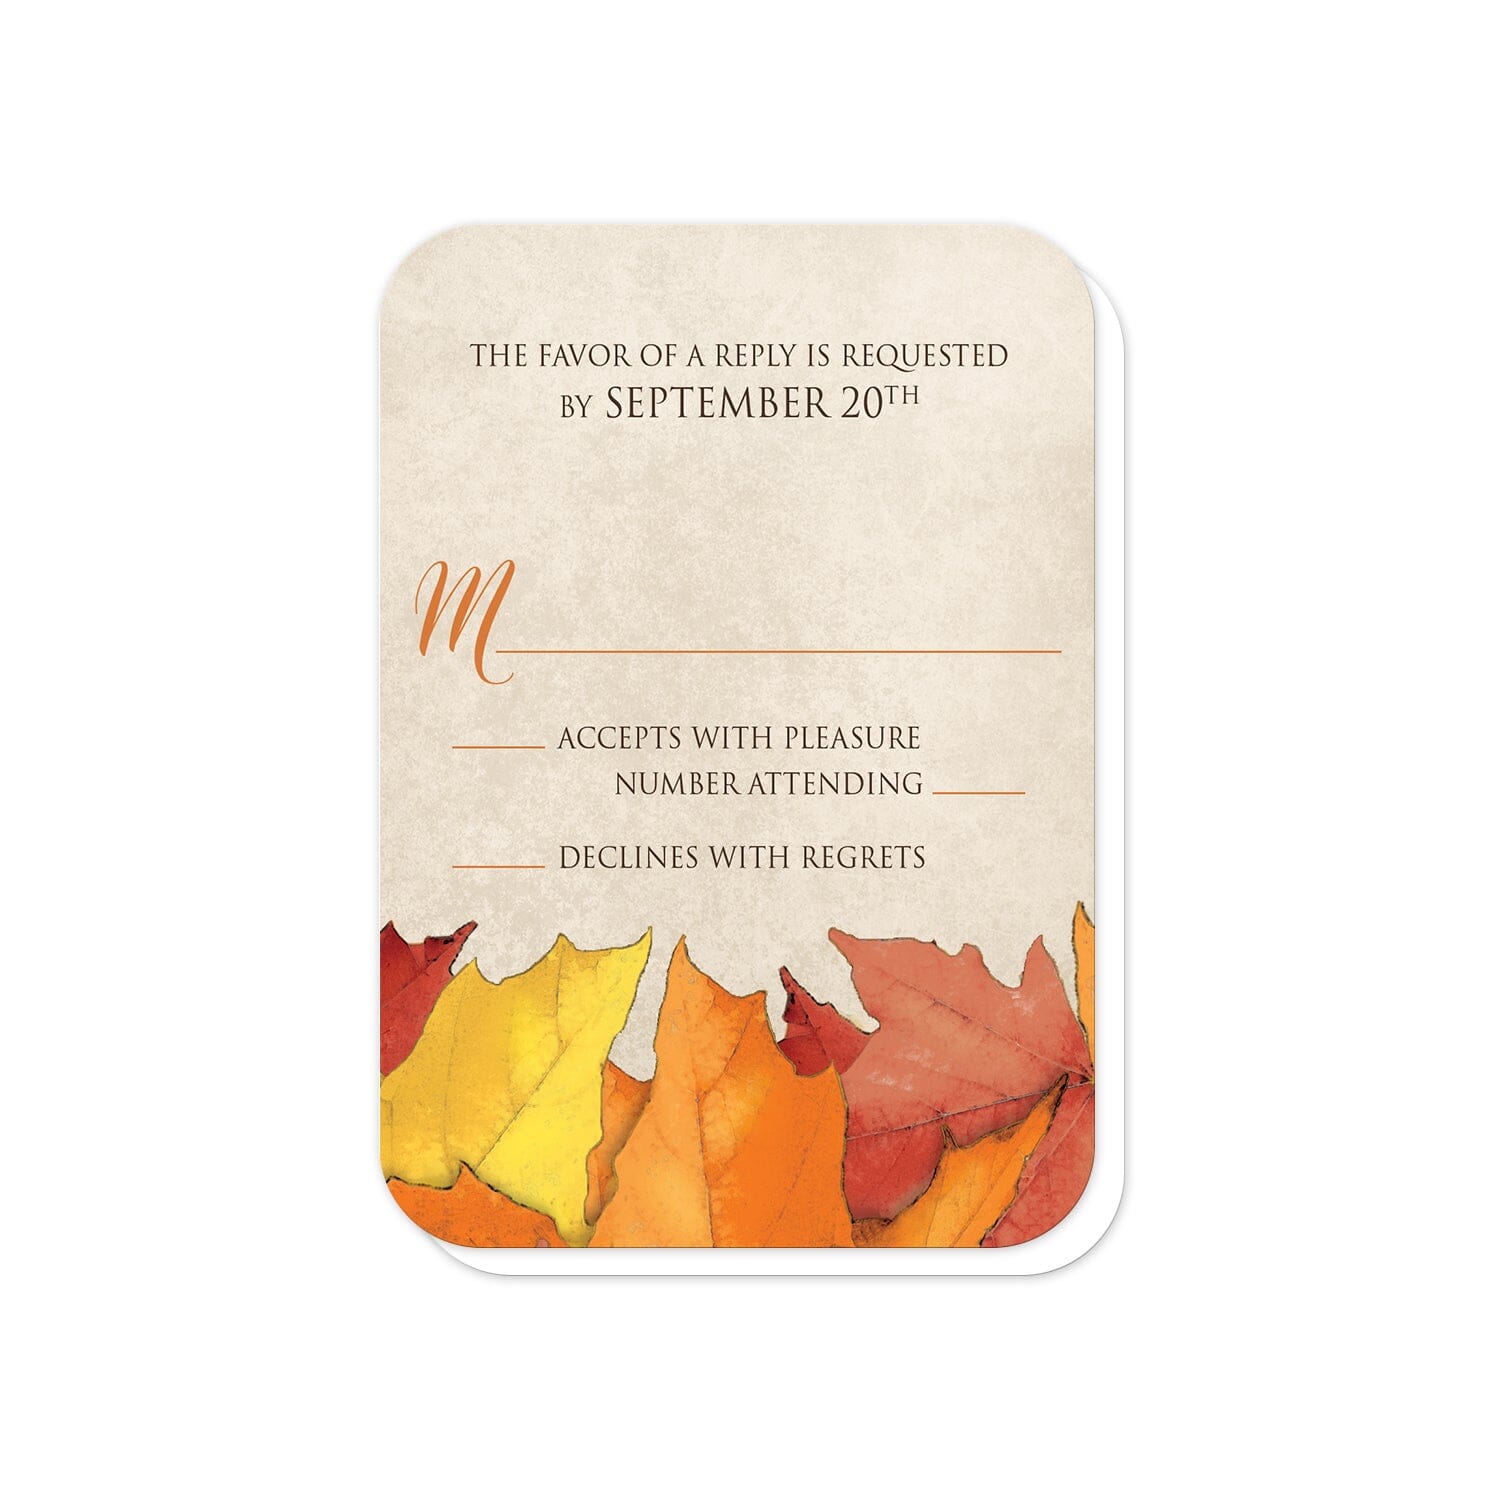 Rustic Wood and Leaves Fall RSVP Cards (with rounded corners) at Artistically Invited.